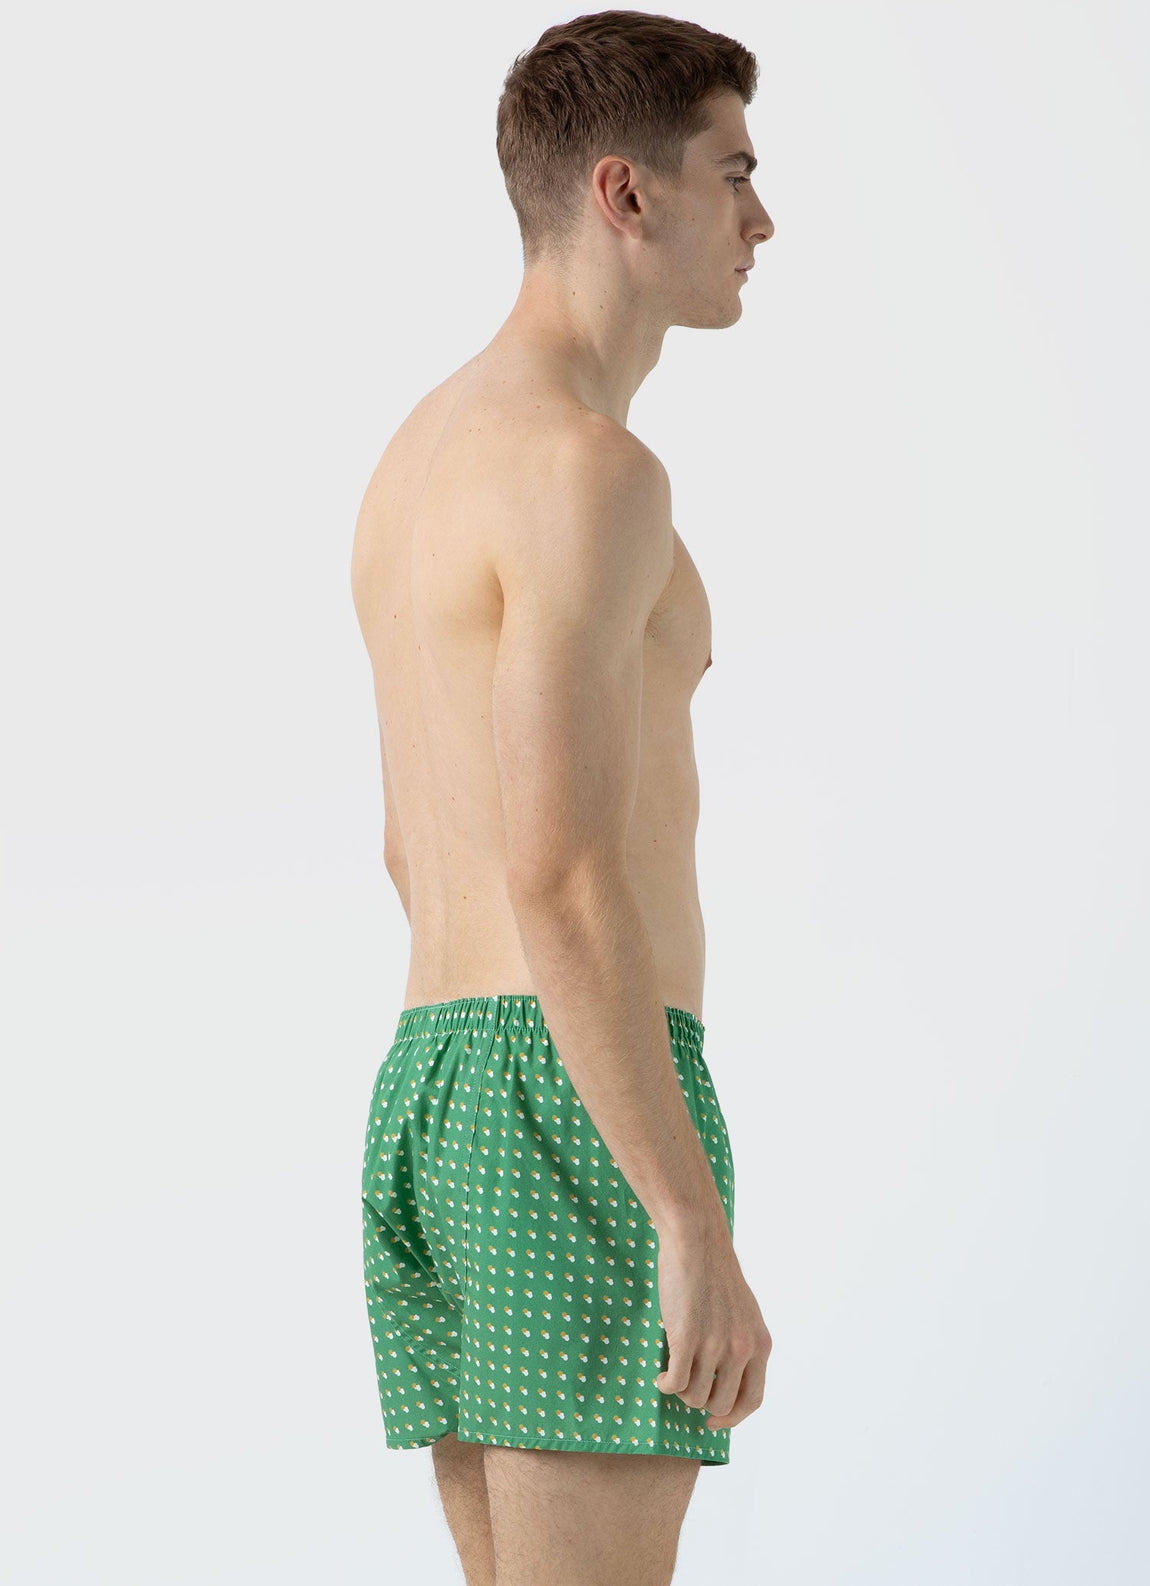 Men's Classic Boxer Shorts in Light Blue Micro Gingham